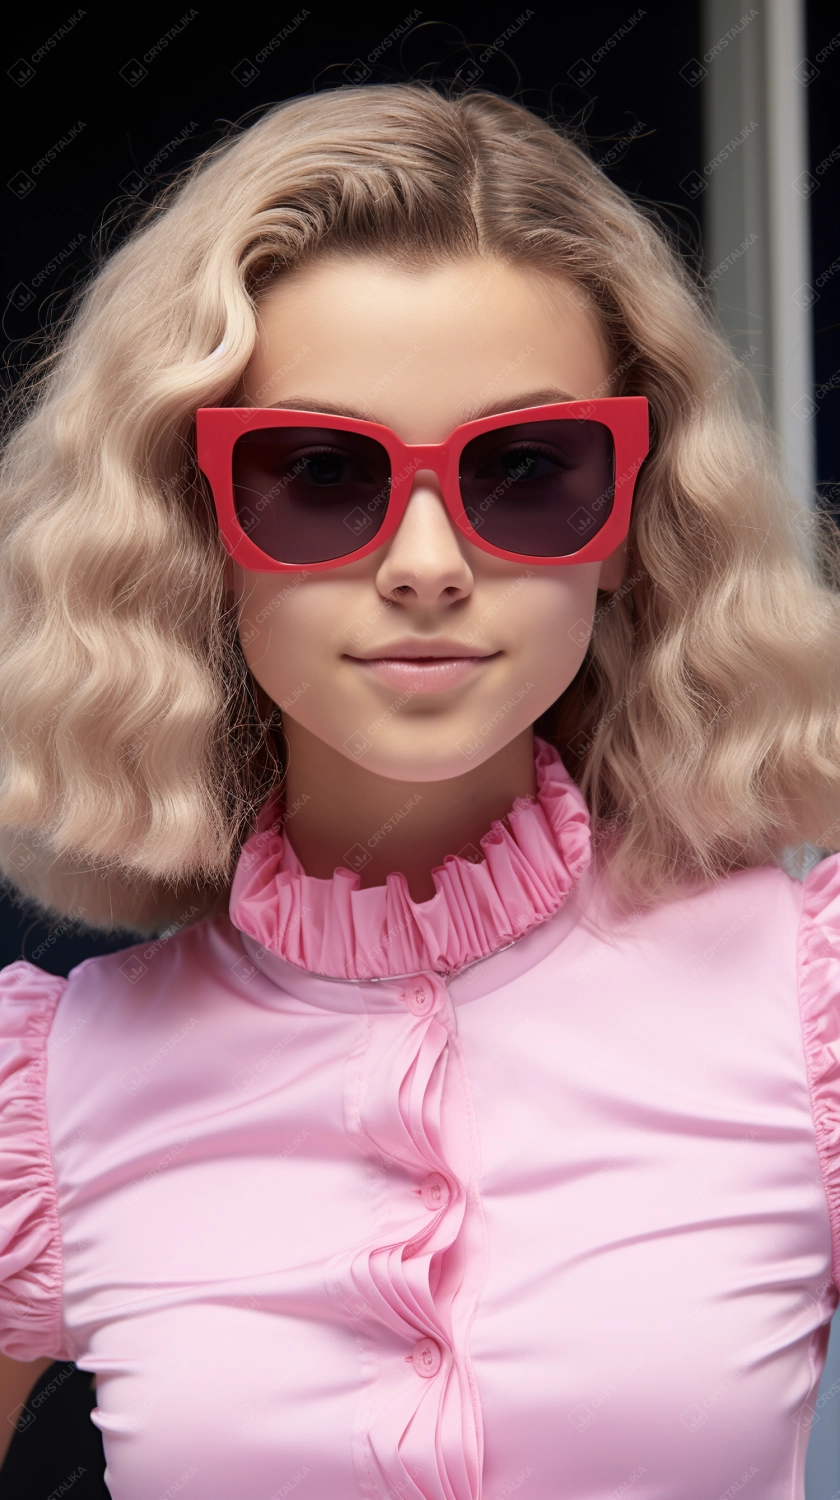 Portrait of a beautiful blonde girl with red sunglasses. Beauty, fashion.